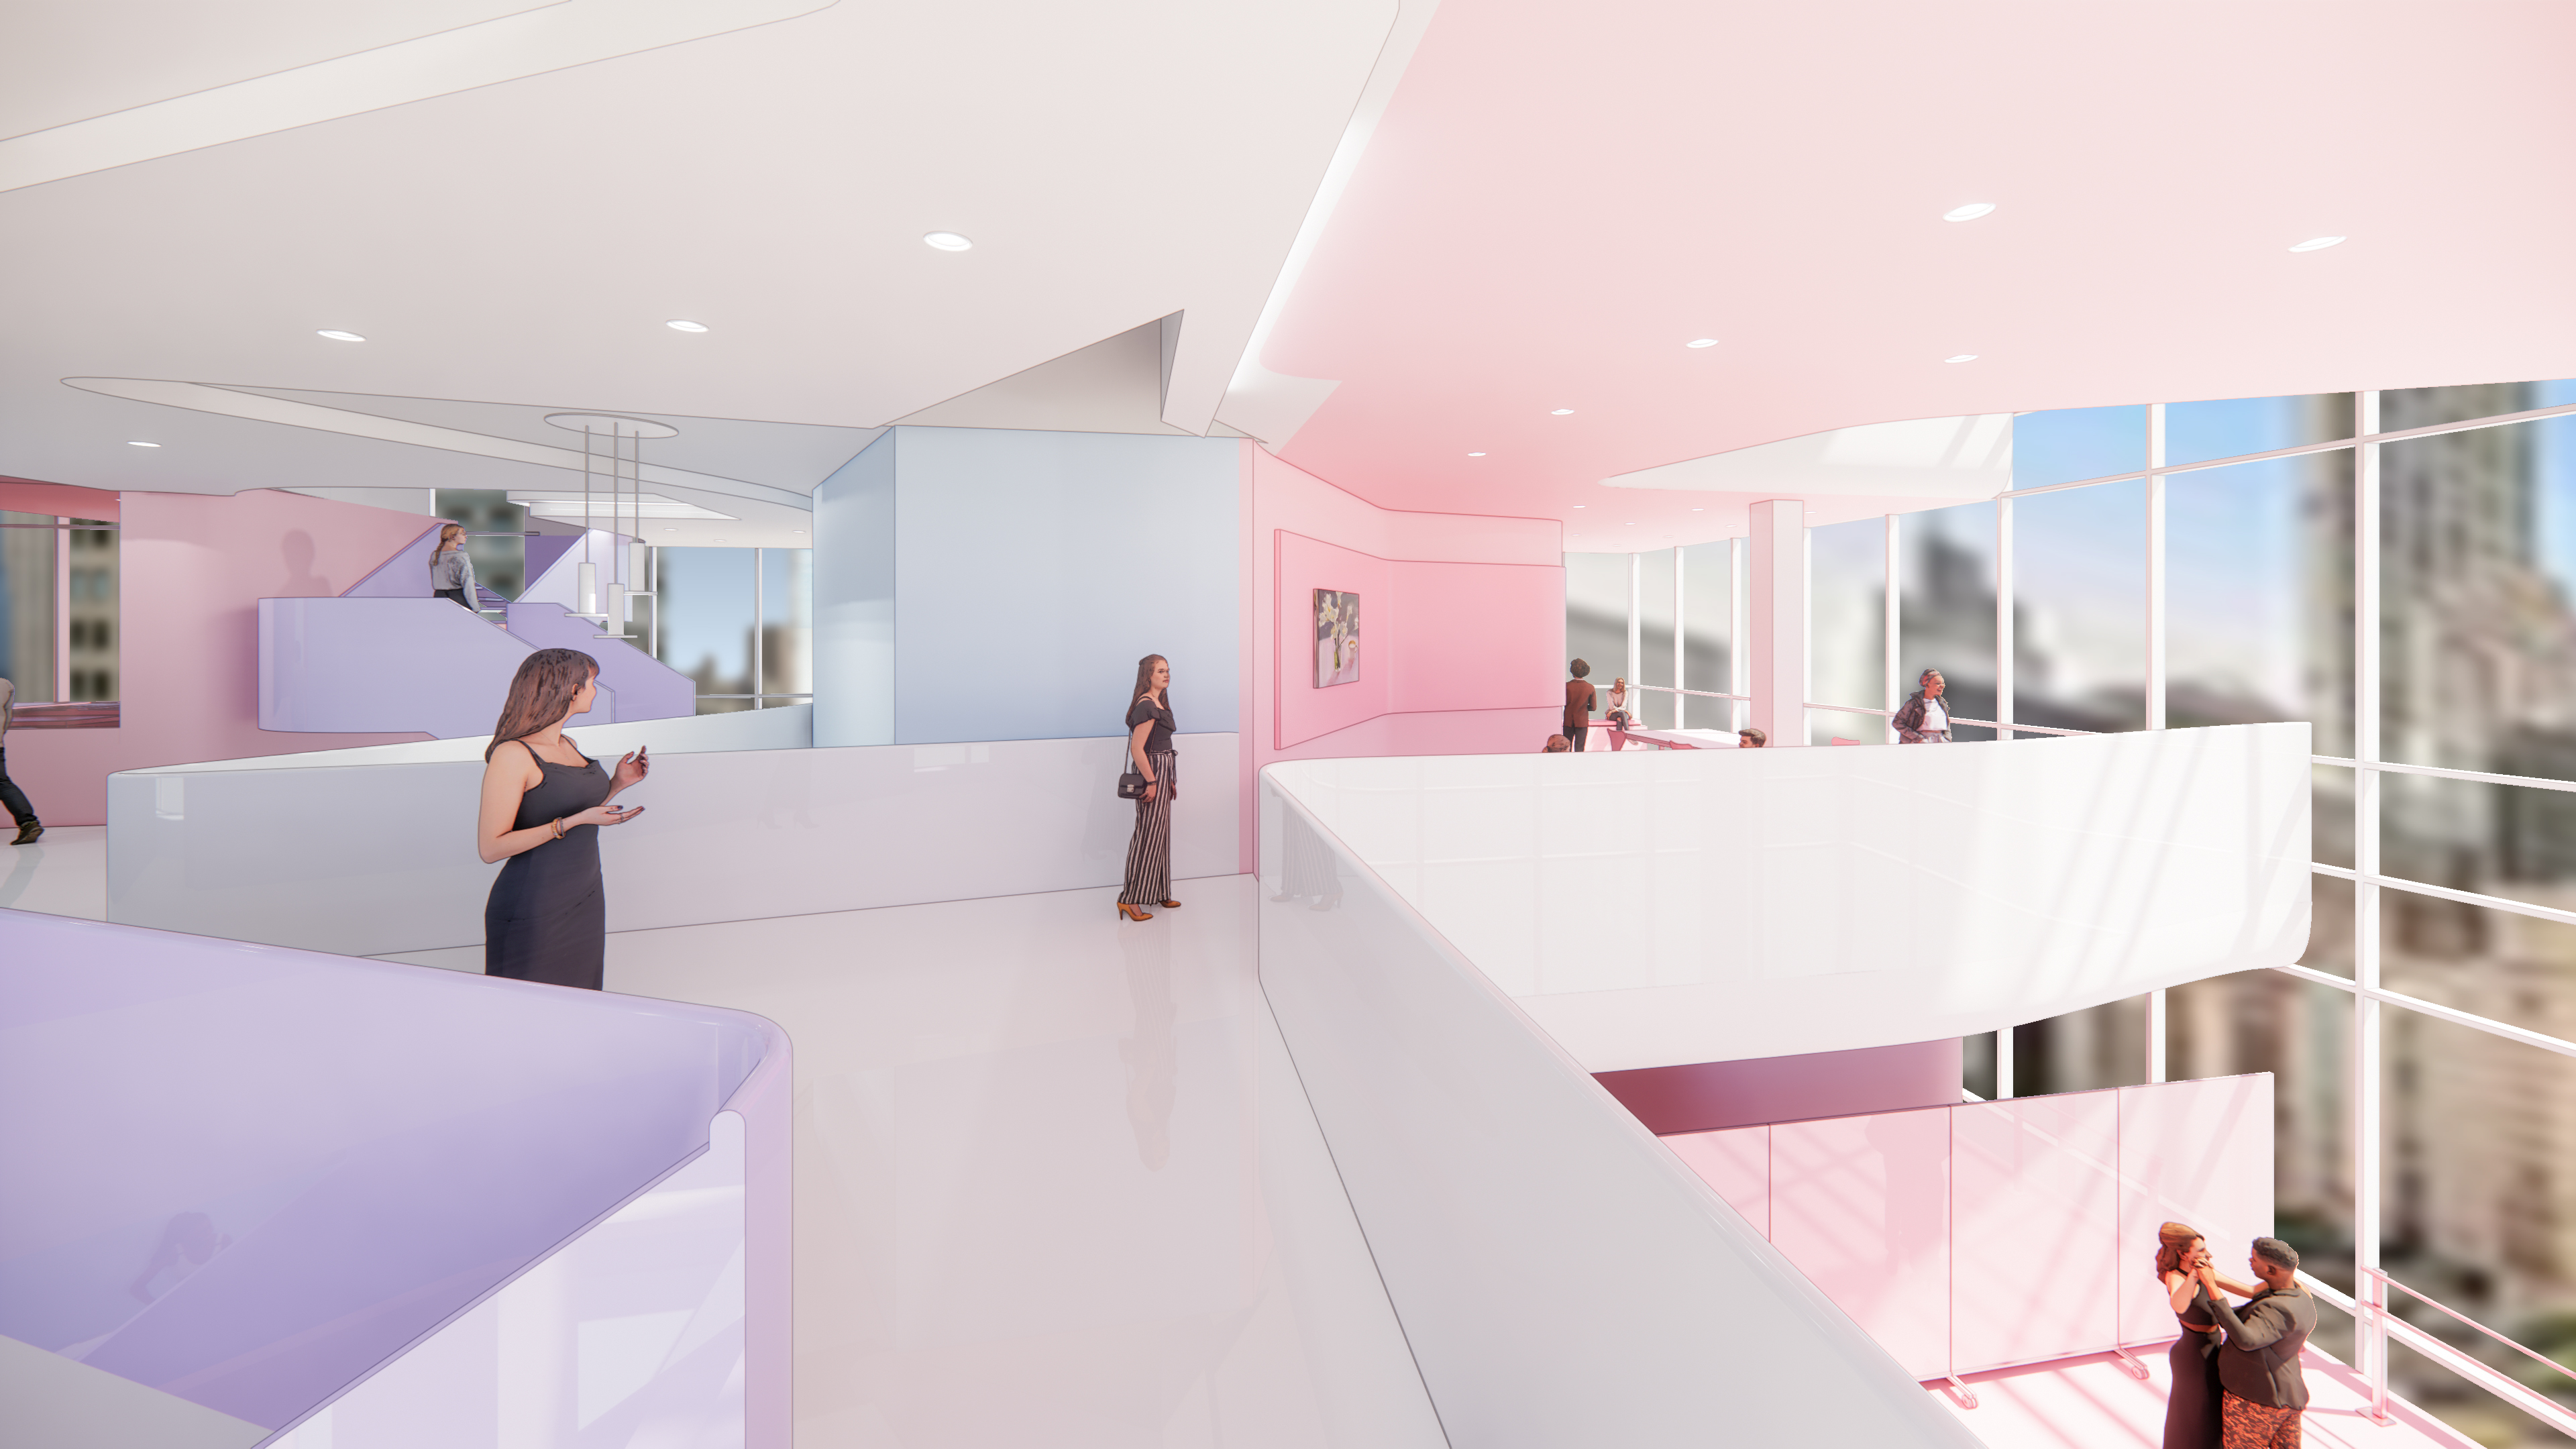 Interior rendering of an artist residency in shades of light pink and purple.